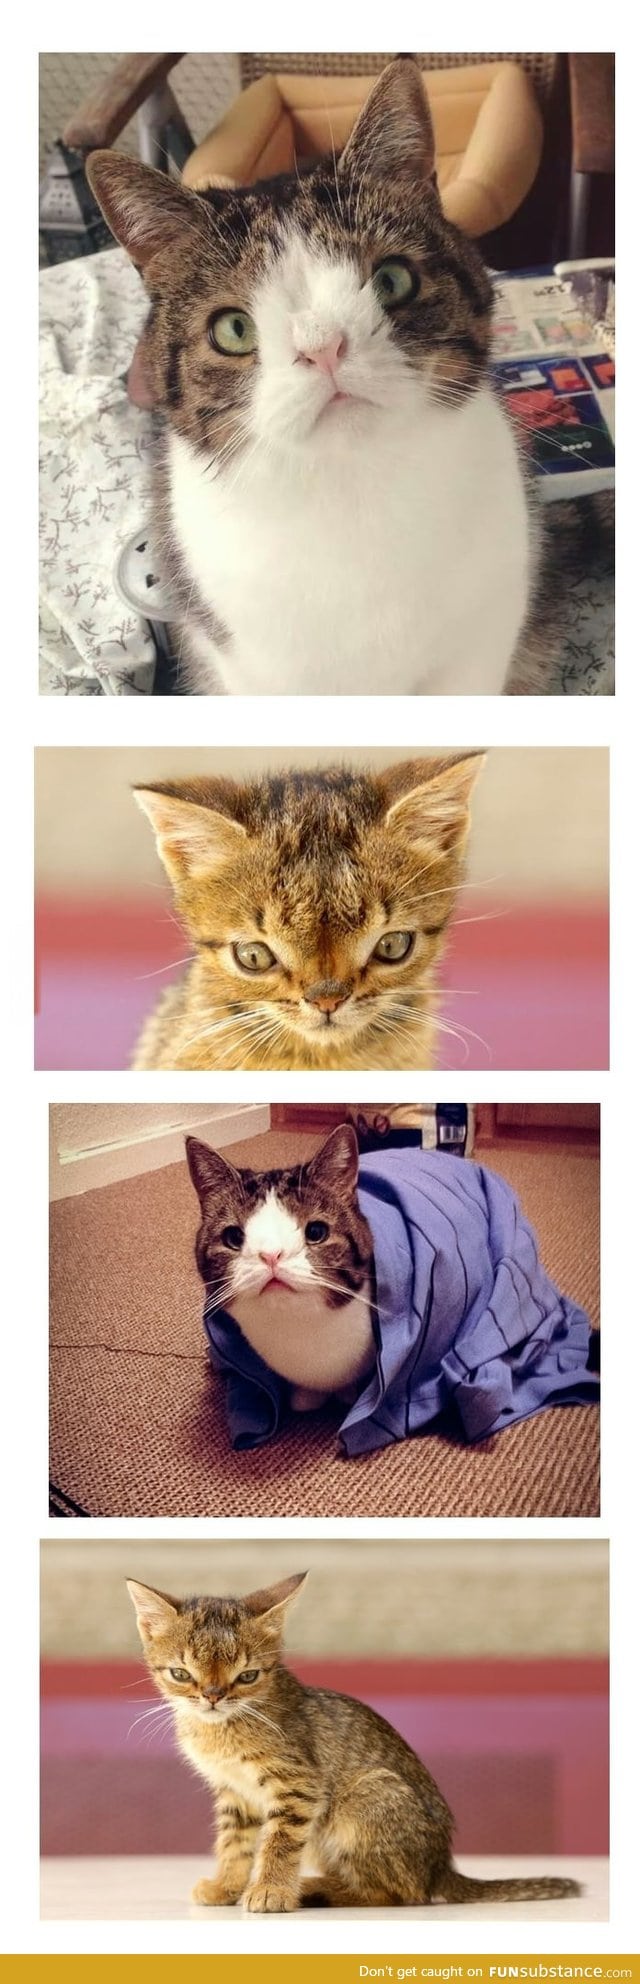 Down syndrome cats